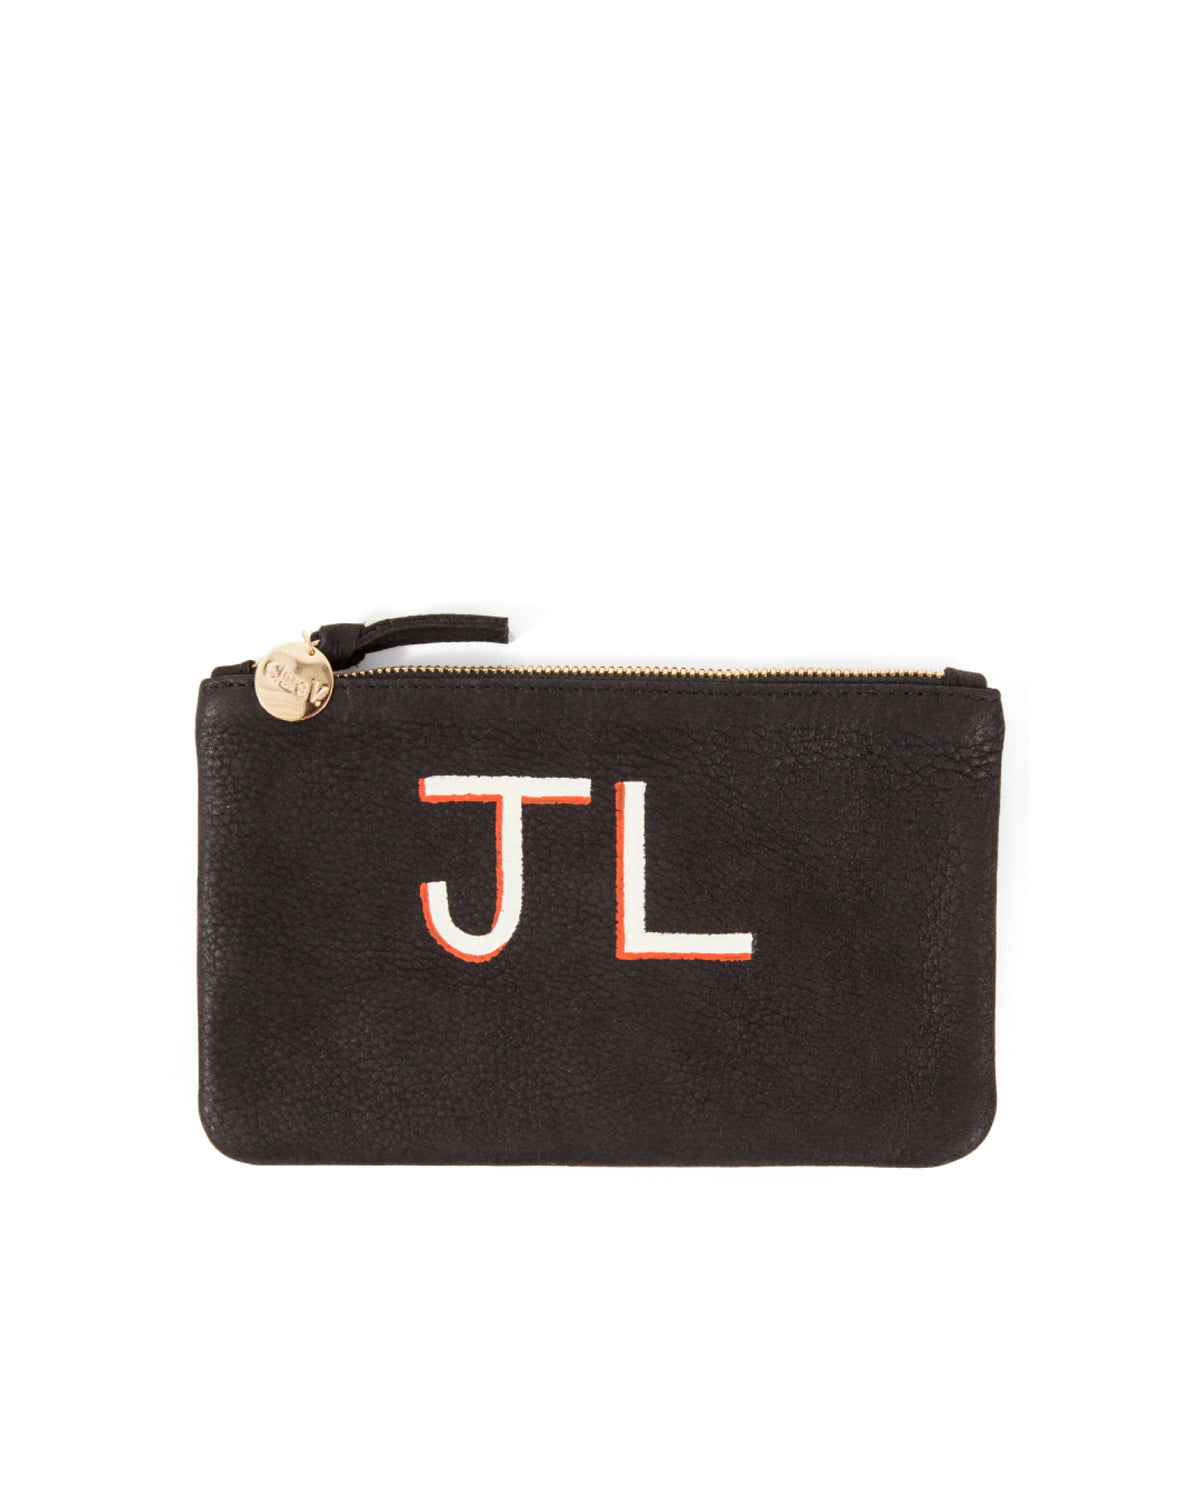 Black Nubuck Wallet Clutch with 2 Inch Letters On The Top Center Placement.